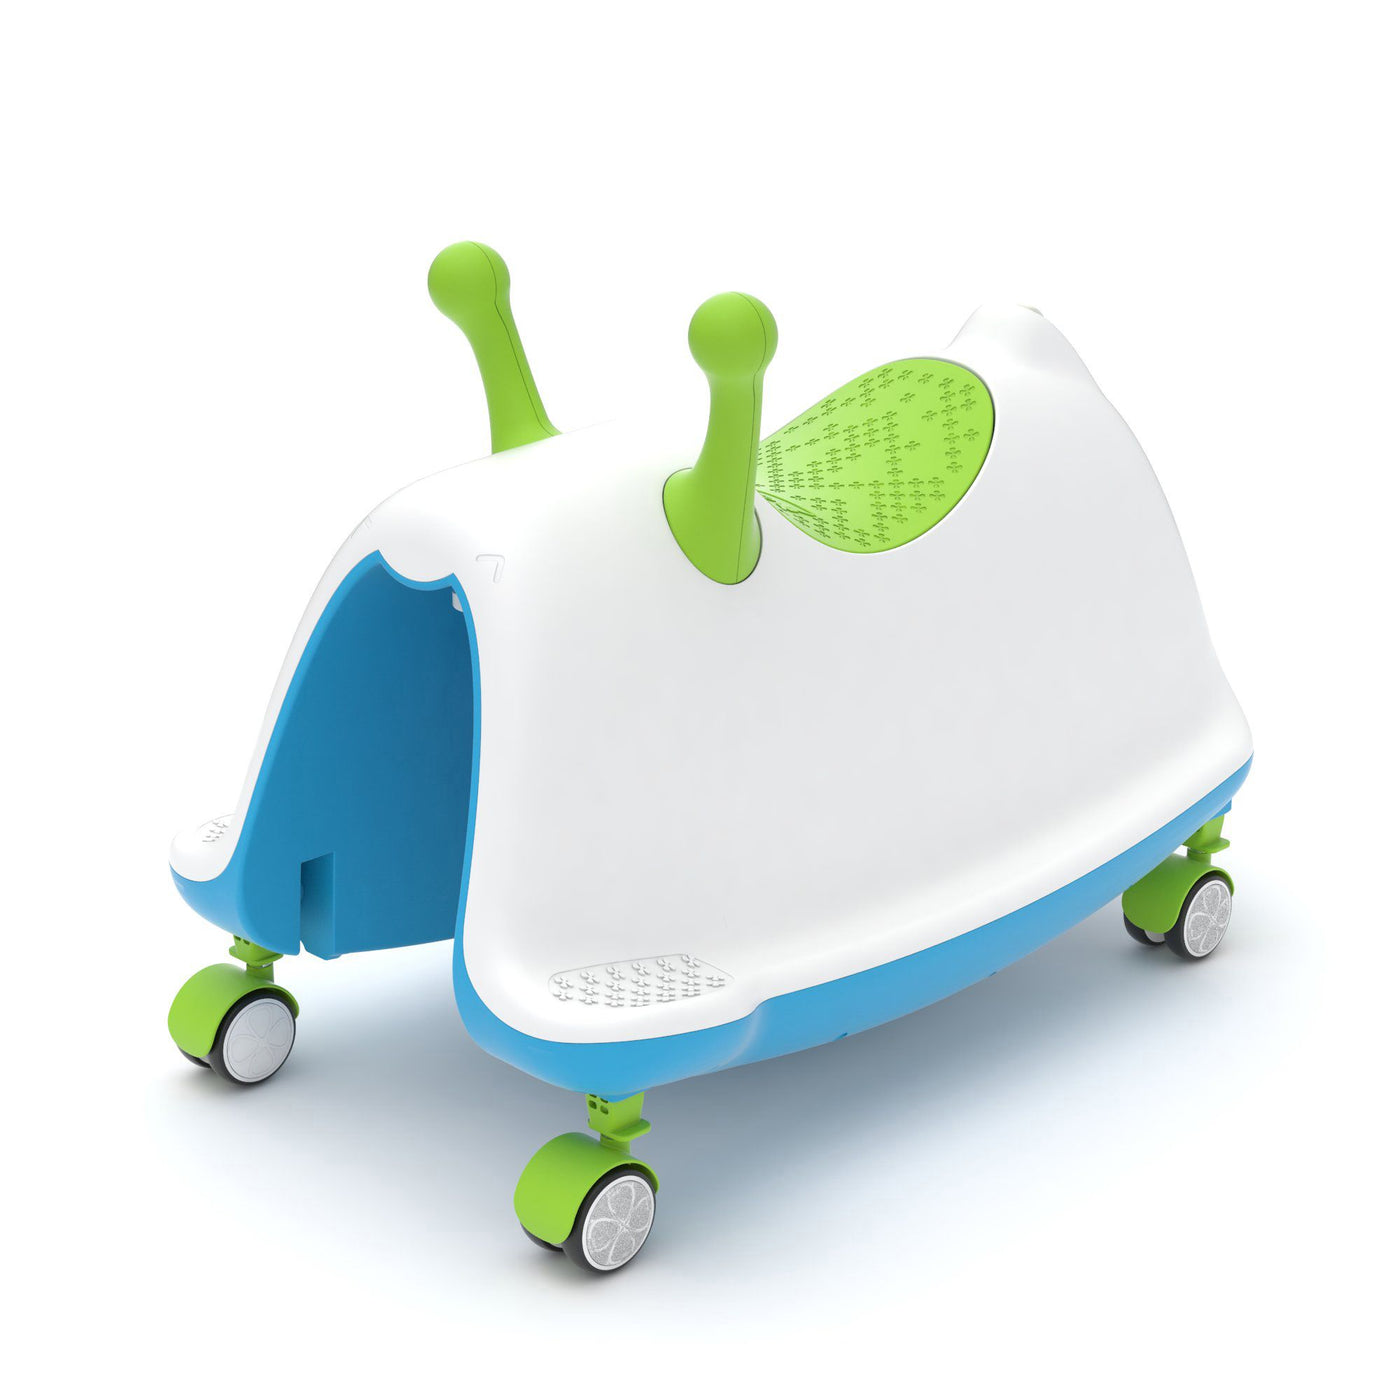 Trackie 4 in 1 Rocker and Riding Toy - Lime Blue